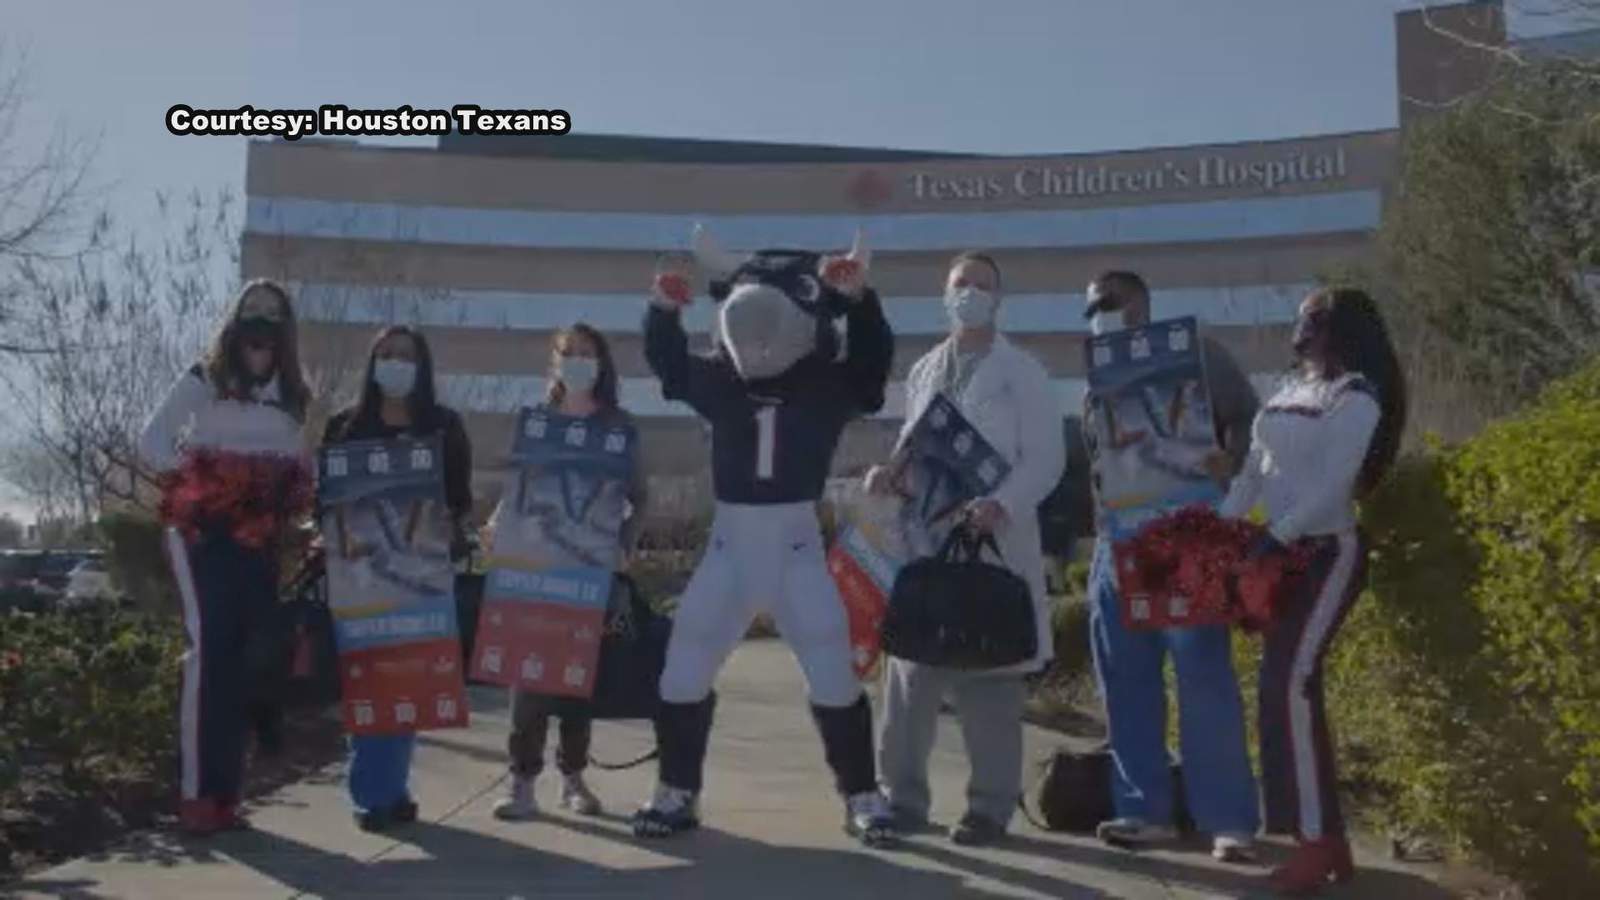 Houston Texans, Texas Children’s Hospital select 4 local healthcare heroes to attend Super Bowl LV